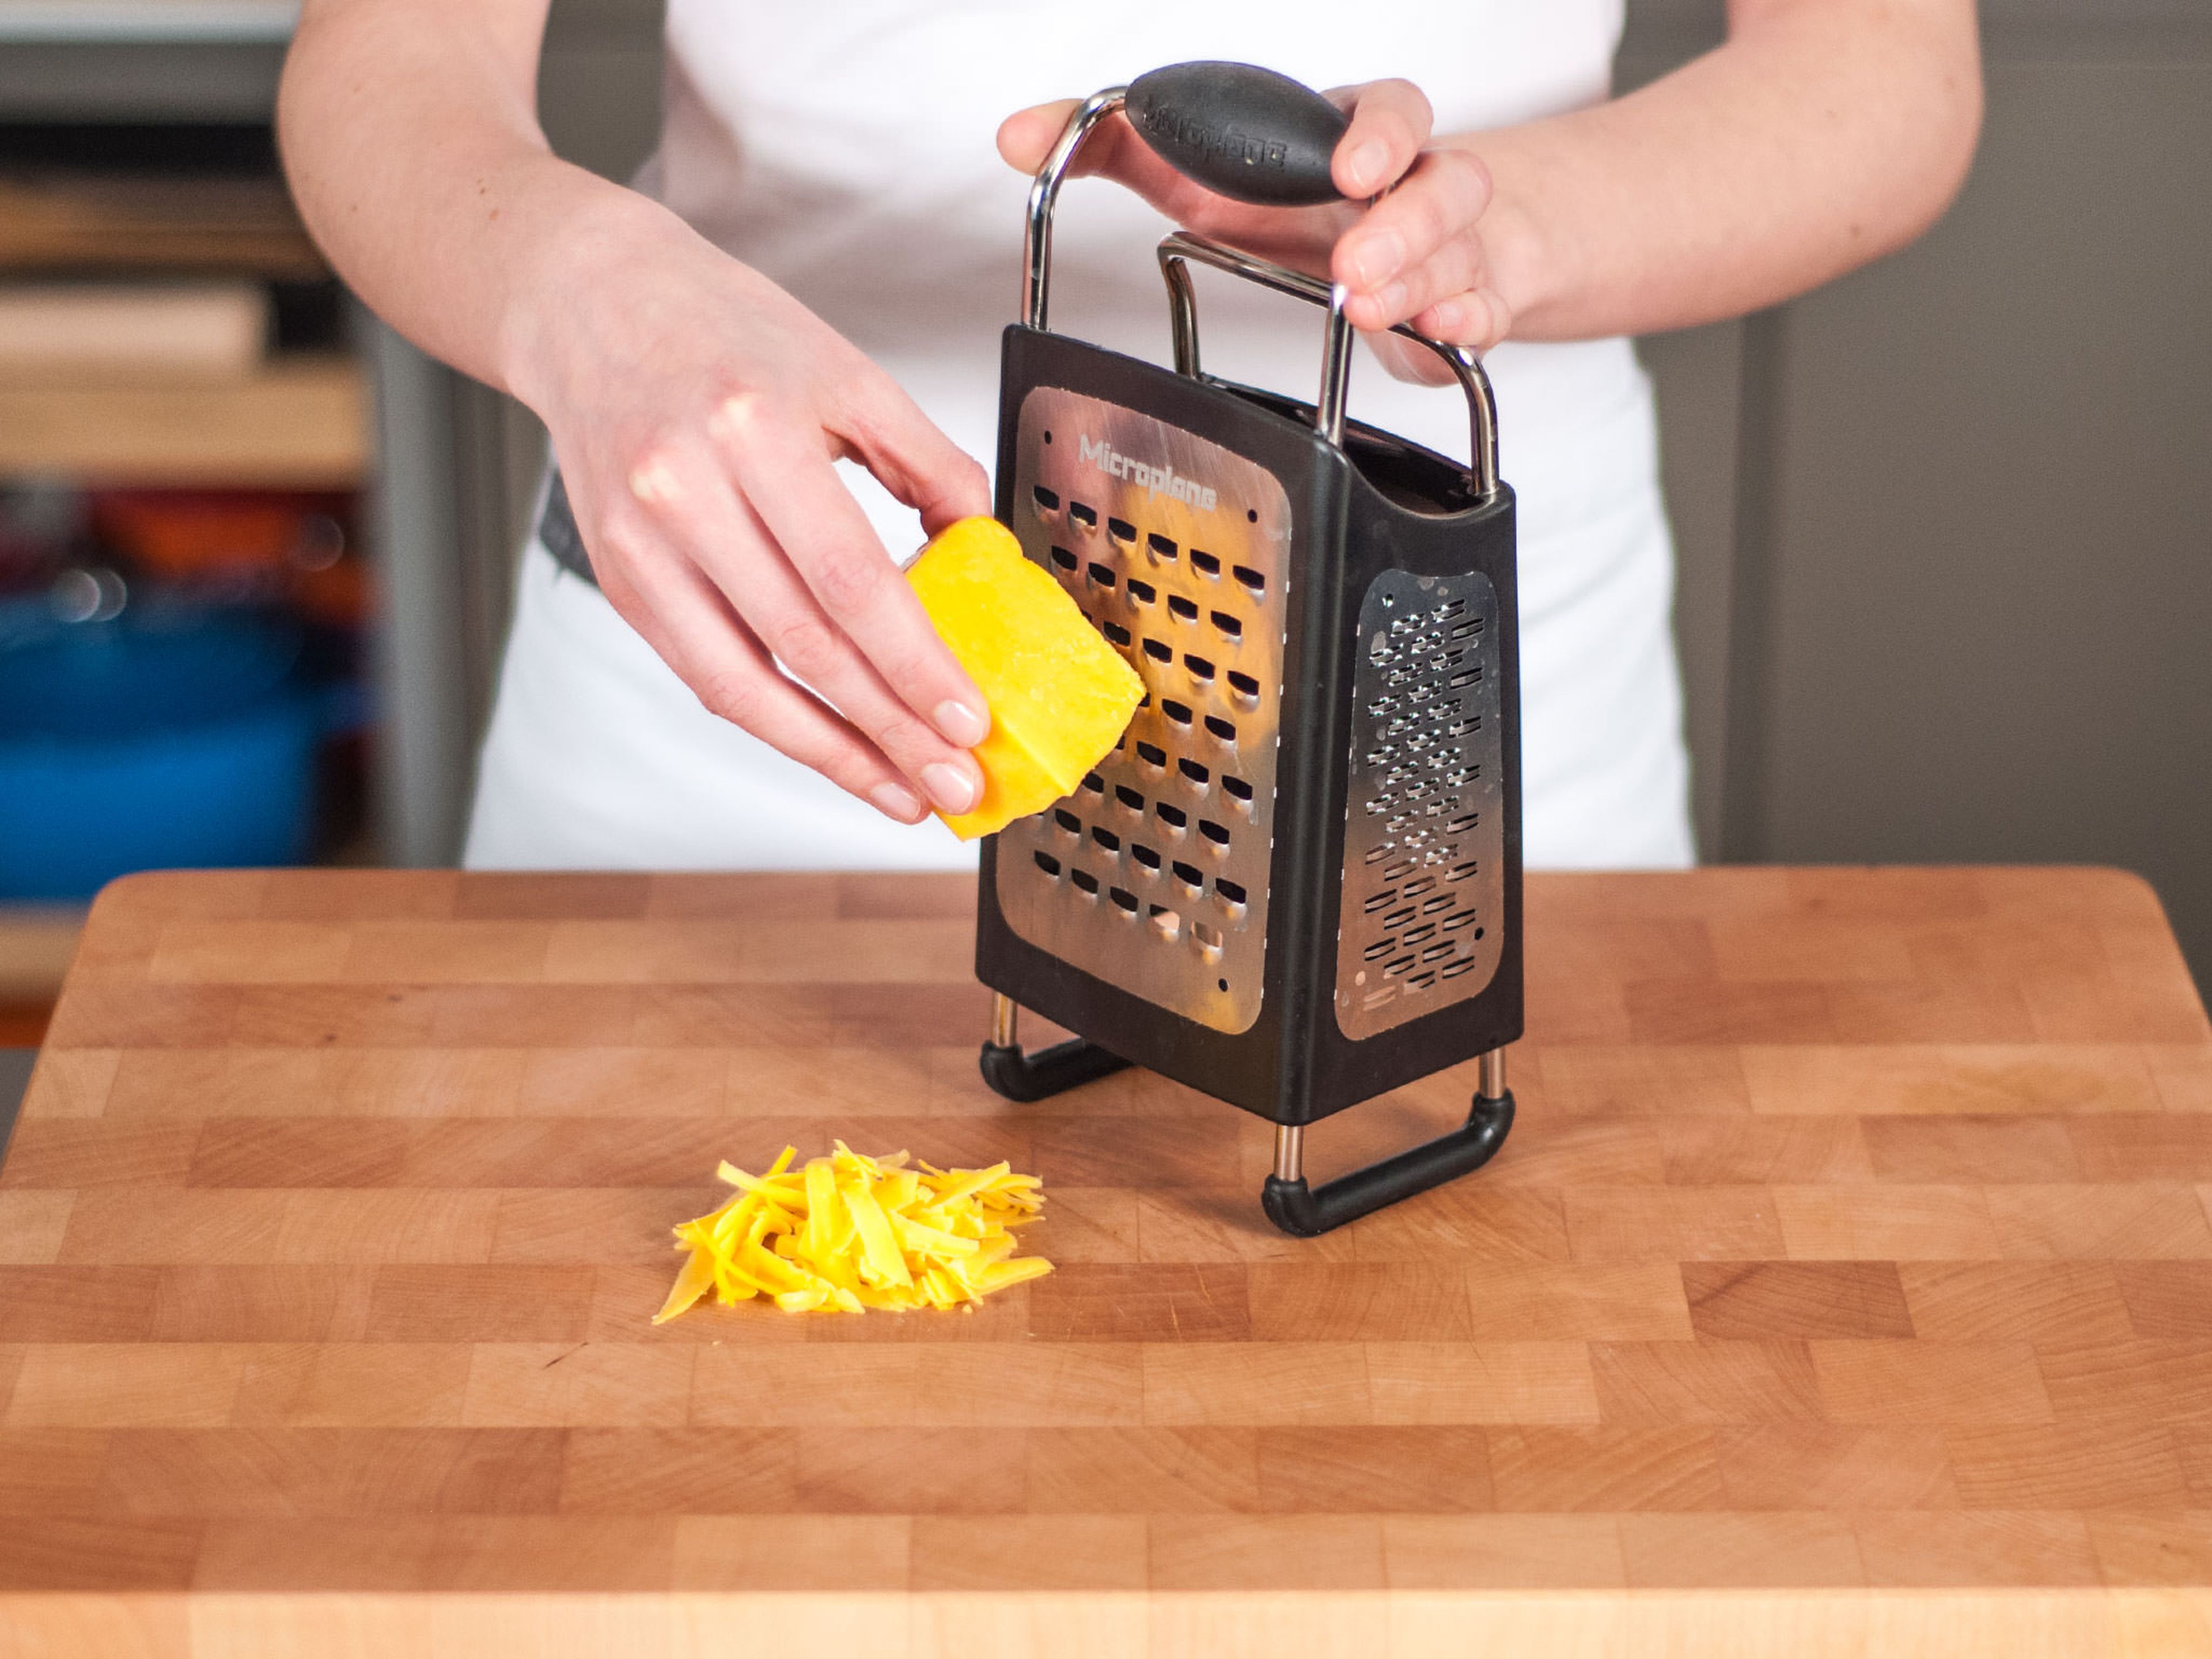 Grate cheddar cheese.